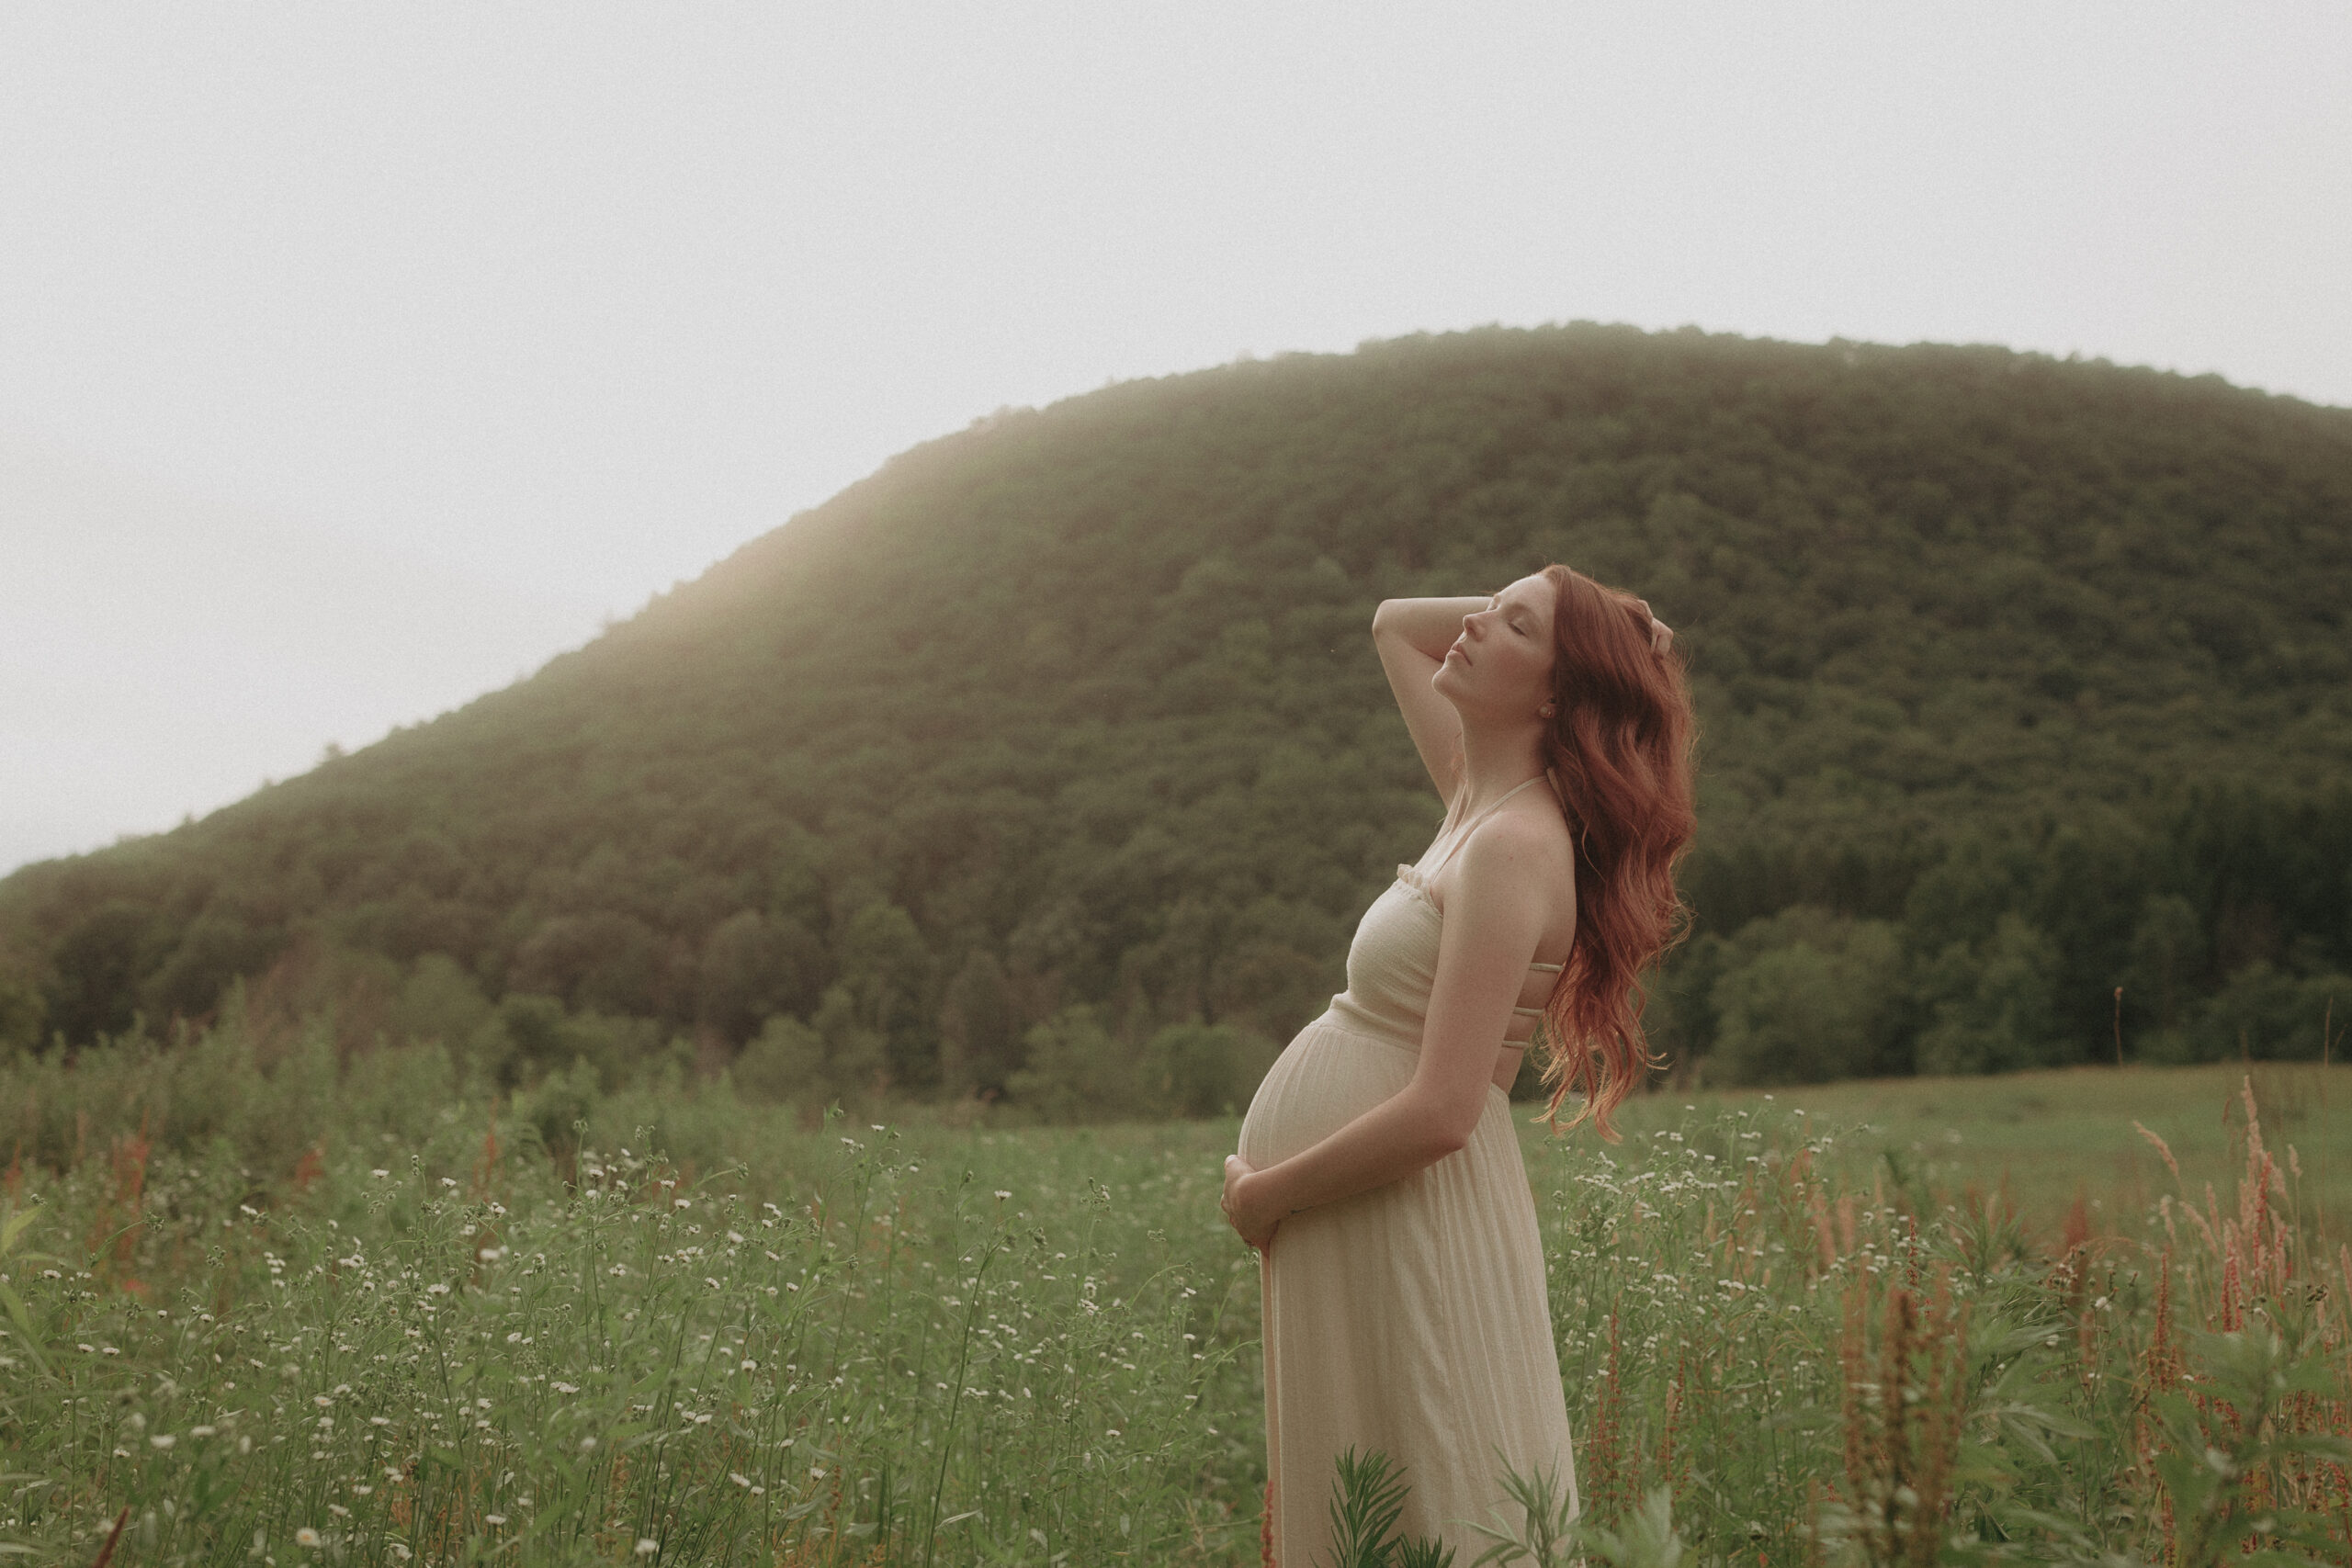 Pregnancy photo in a field of wildflowers with a hill in the background